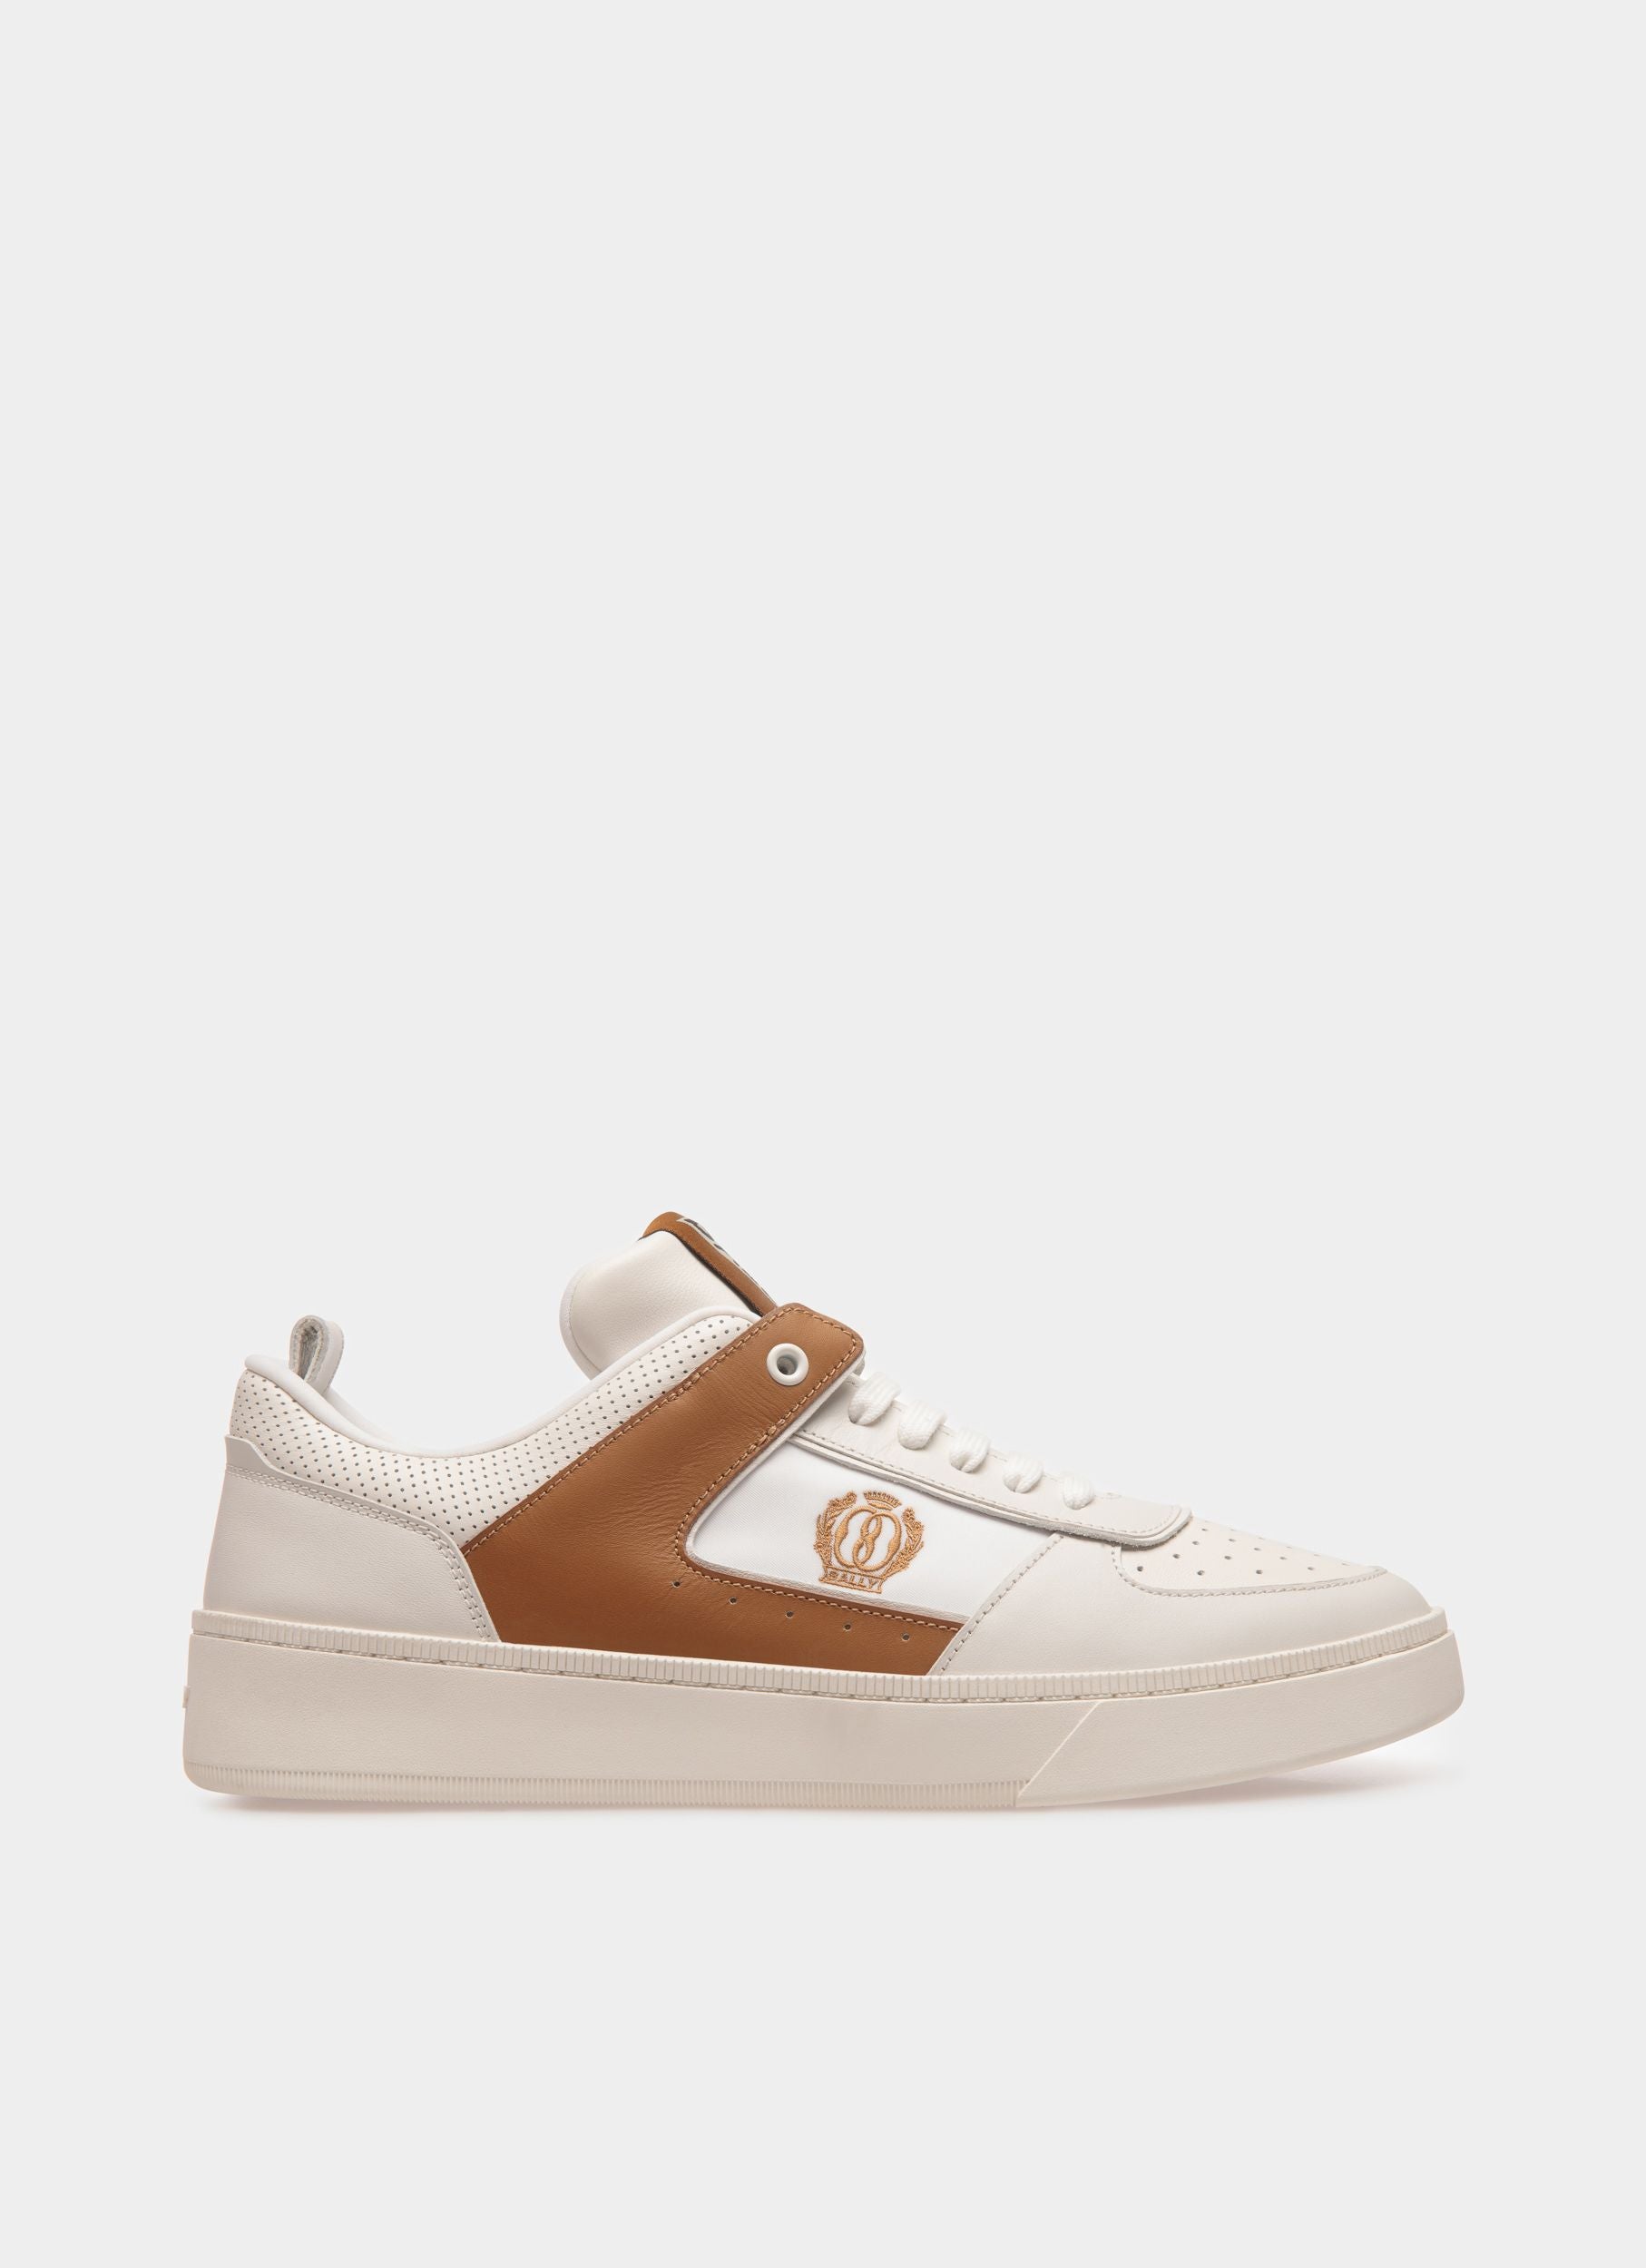 Sneaker | Men's Shoes | White and Brown Leather | Bally | Still Life Side